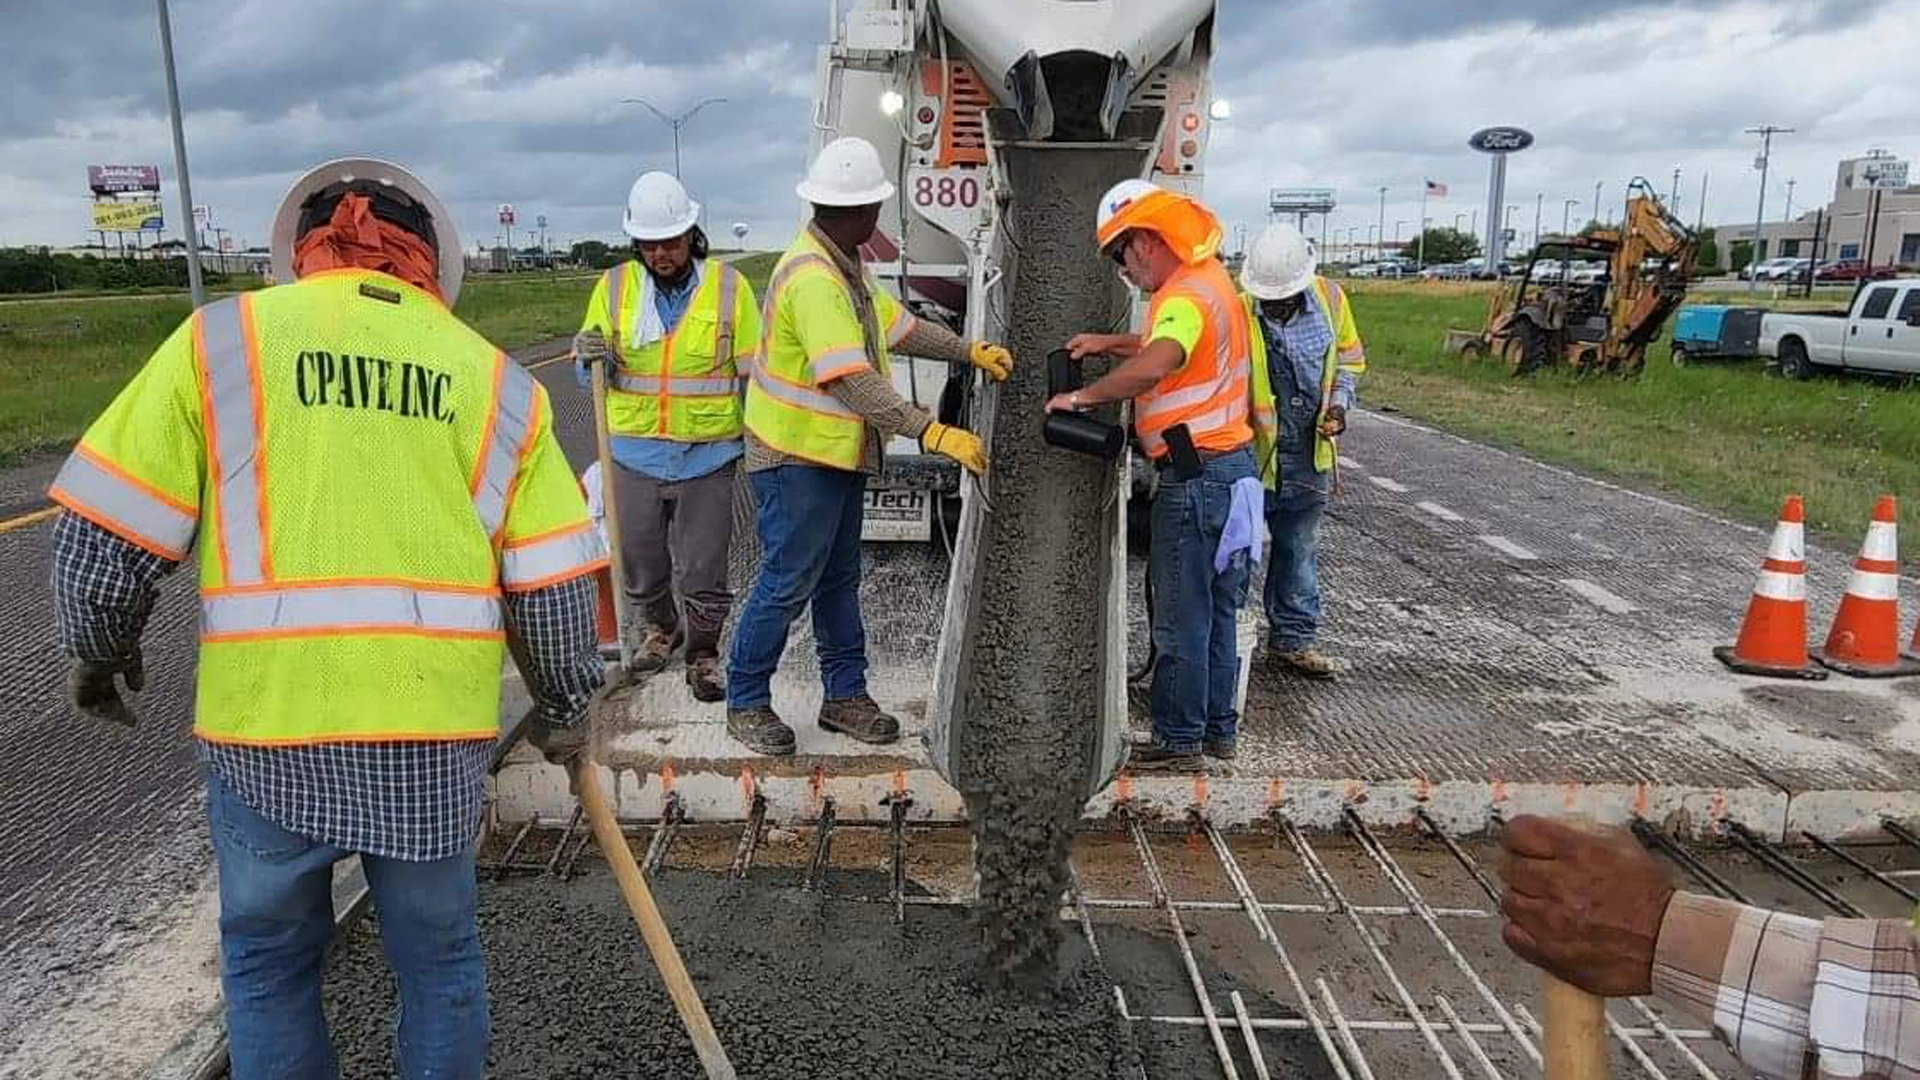 Workers with concrete being poured for roadway repair